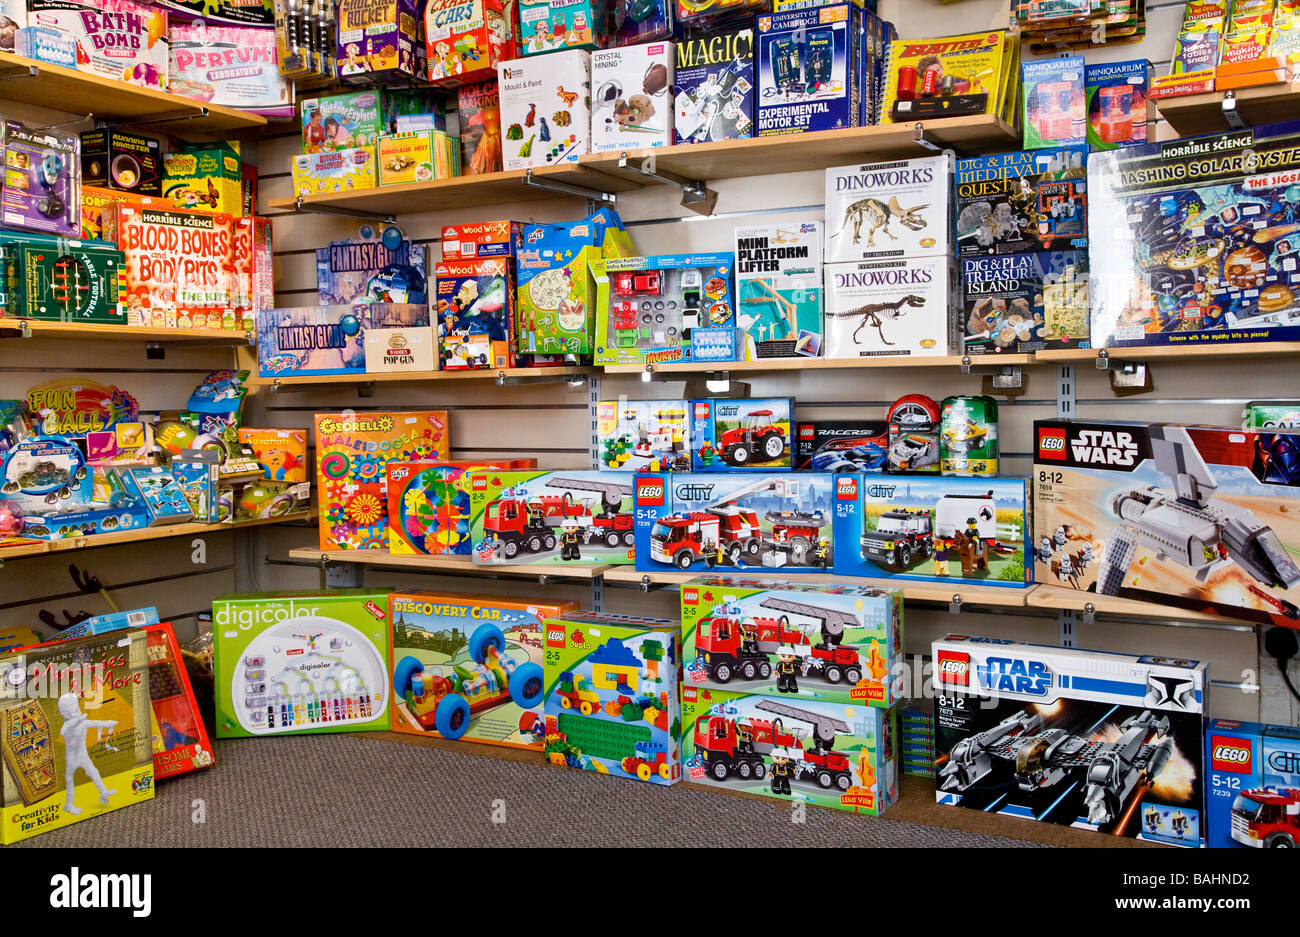 Boxes of creative toys and games for children on shelves inside a toy shop or store Stock Photo